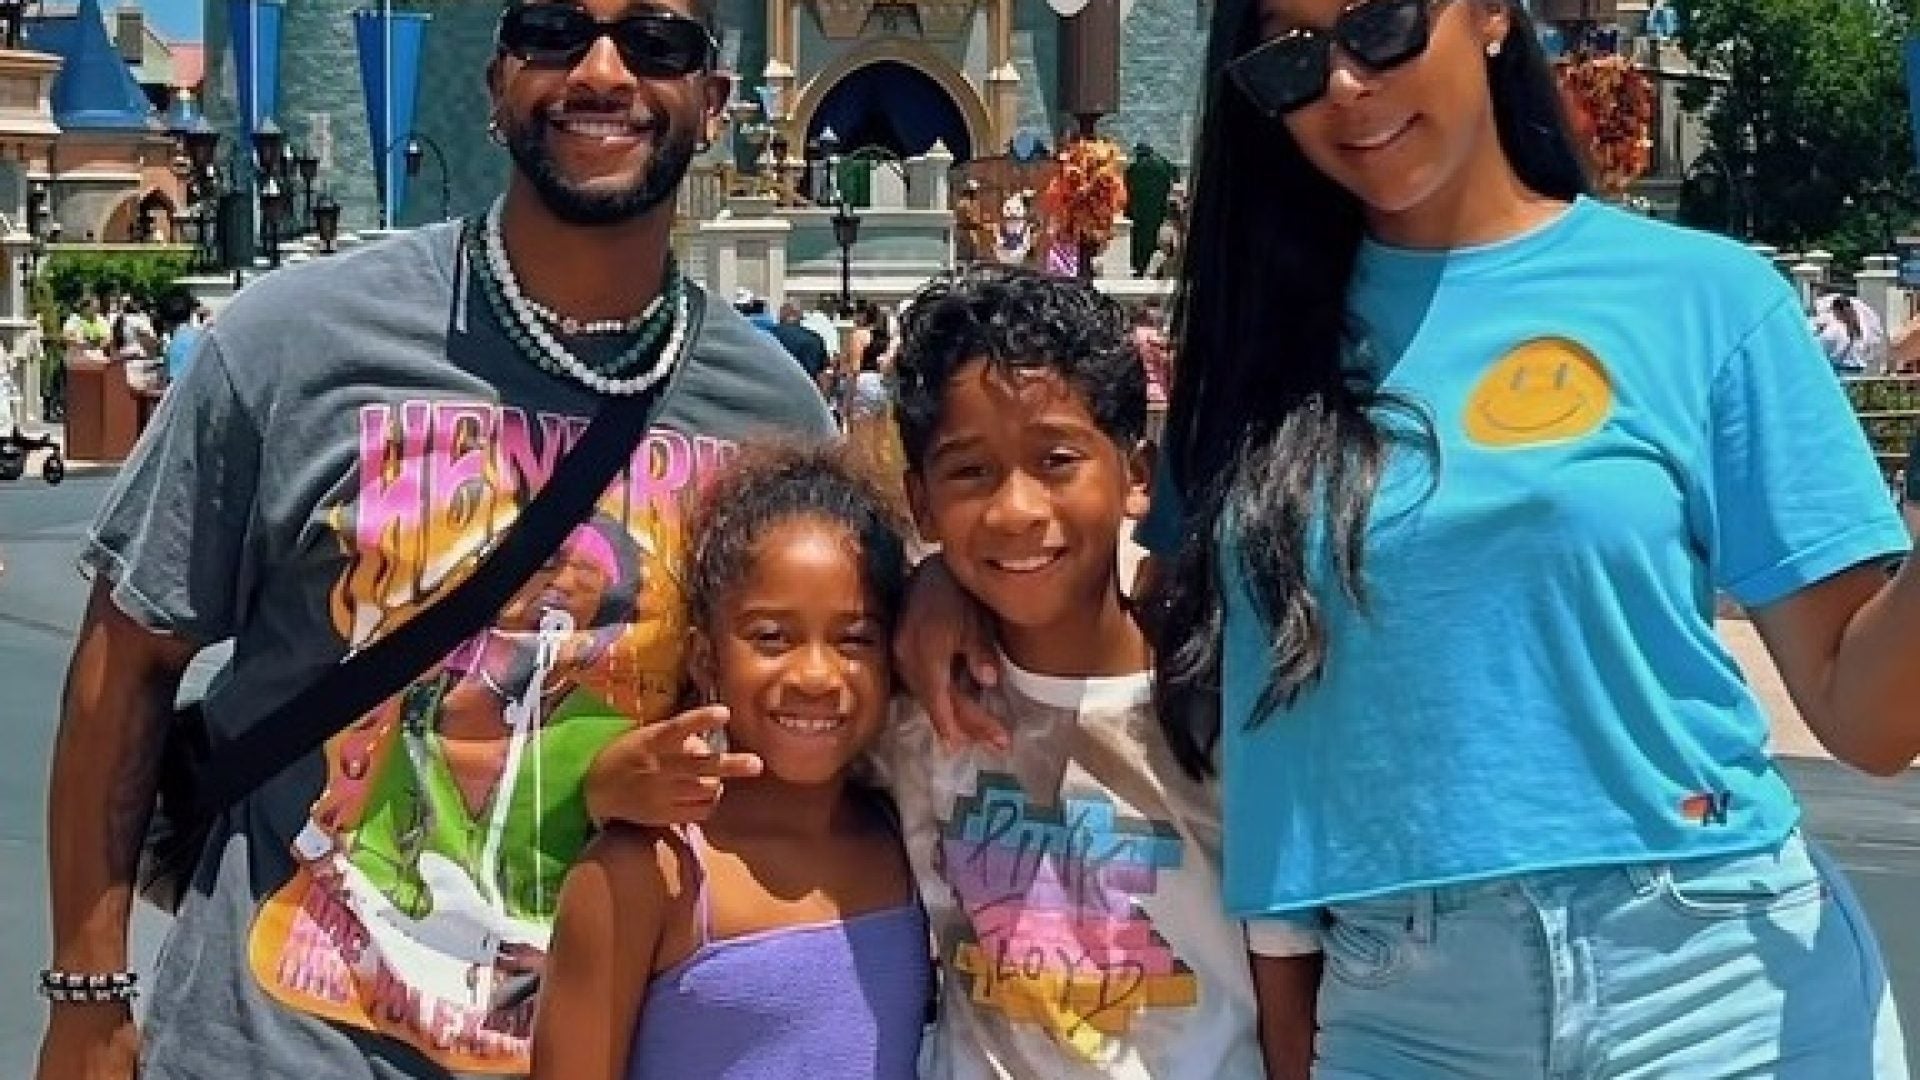 Omarion And Apryl Jones Took Their Kids To Disney World For Their First Family Trip Together